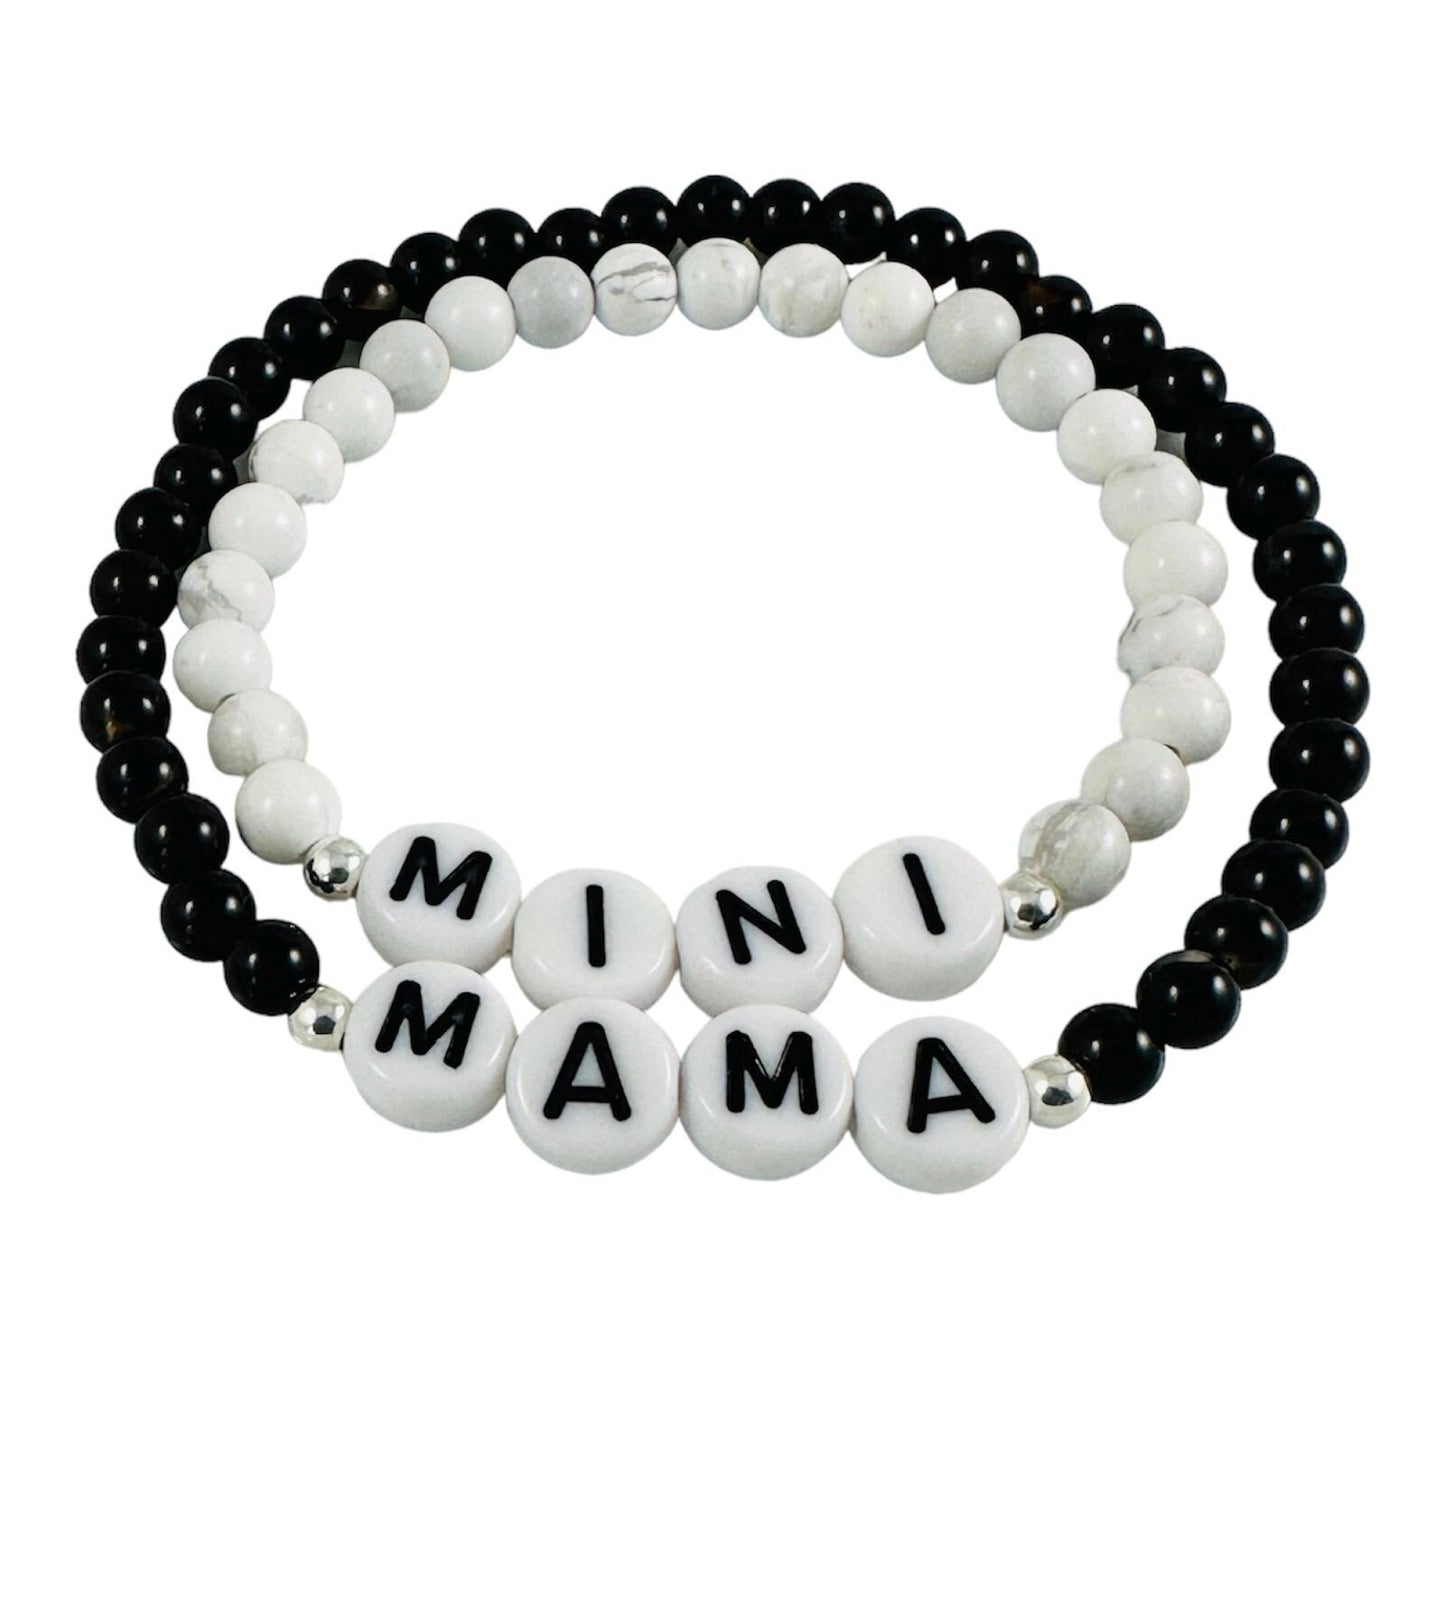 Mama Bracelet,Mother's Day gifts,Gifts For Moms,Mom Bracelet,Personalized Bracelet Gift,Name Bracelet,Mother Mama Mom Mommy Mini Bracelet